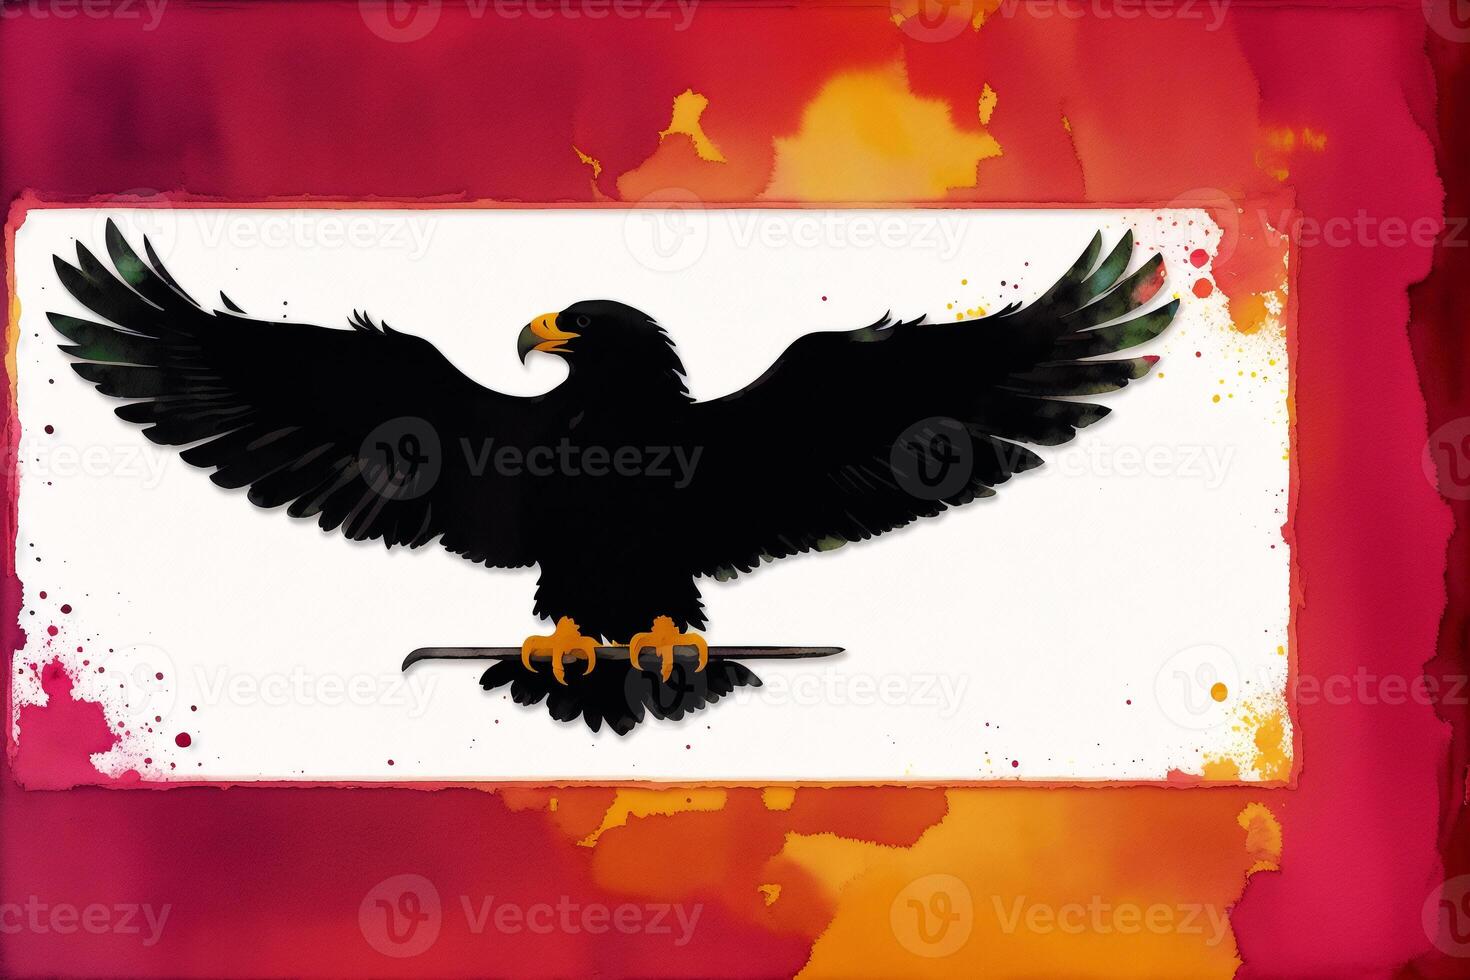 Illustration of an eagle on abstract watercolor background. Watercolor paint. Digital art, photo